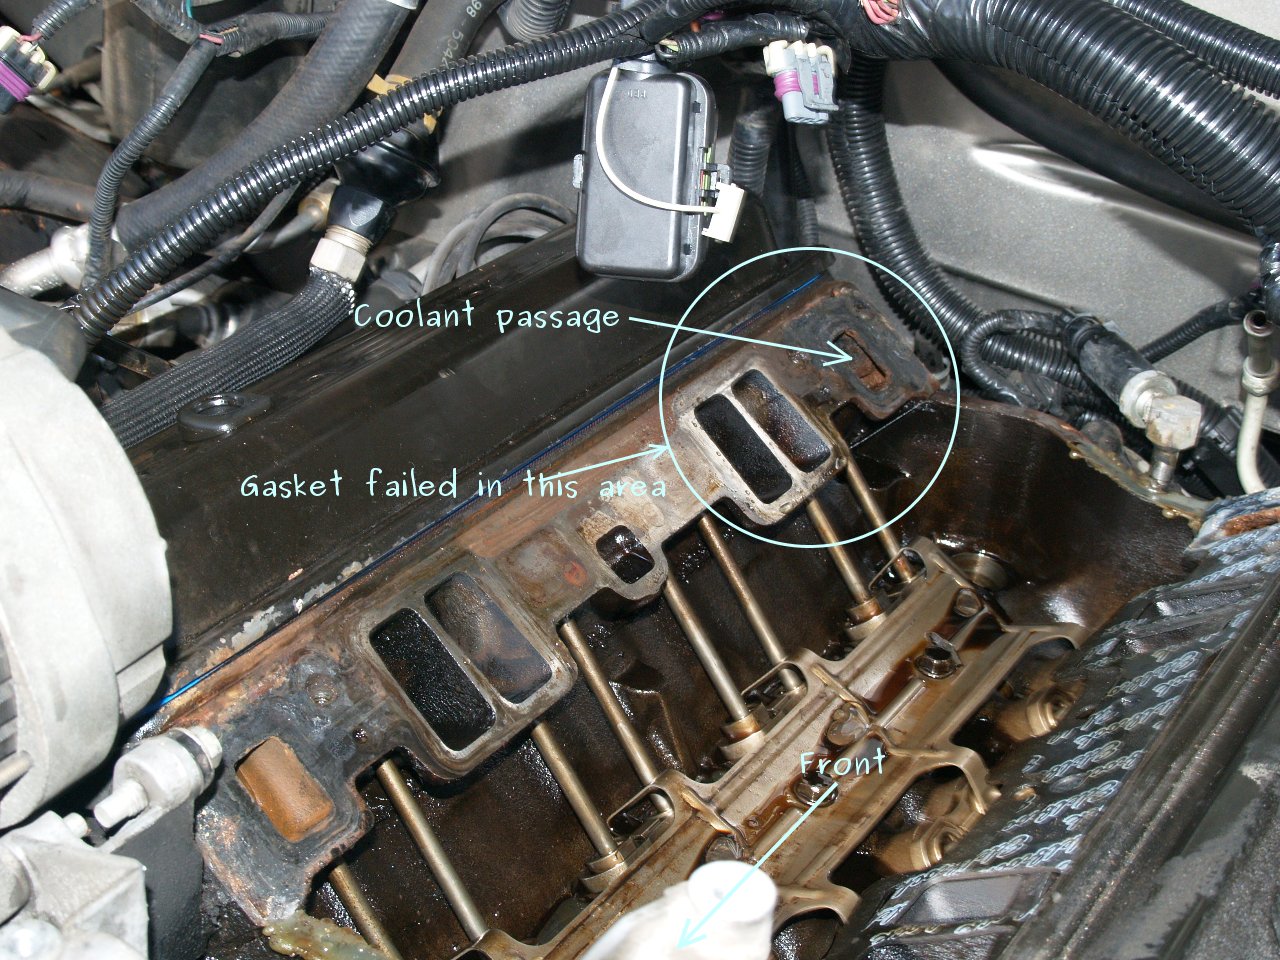 See P0759 in engine